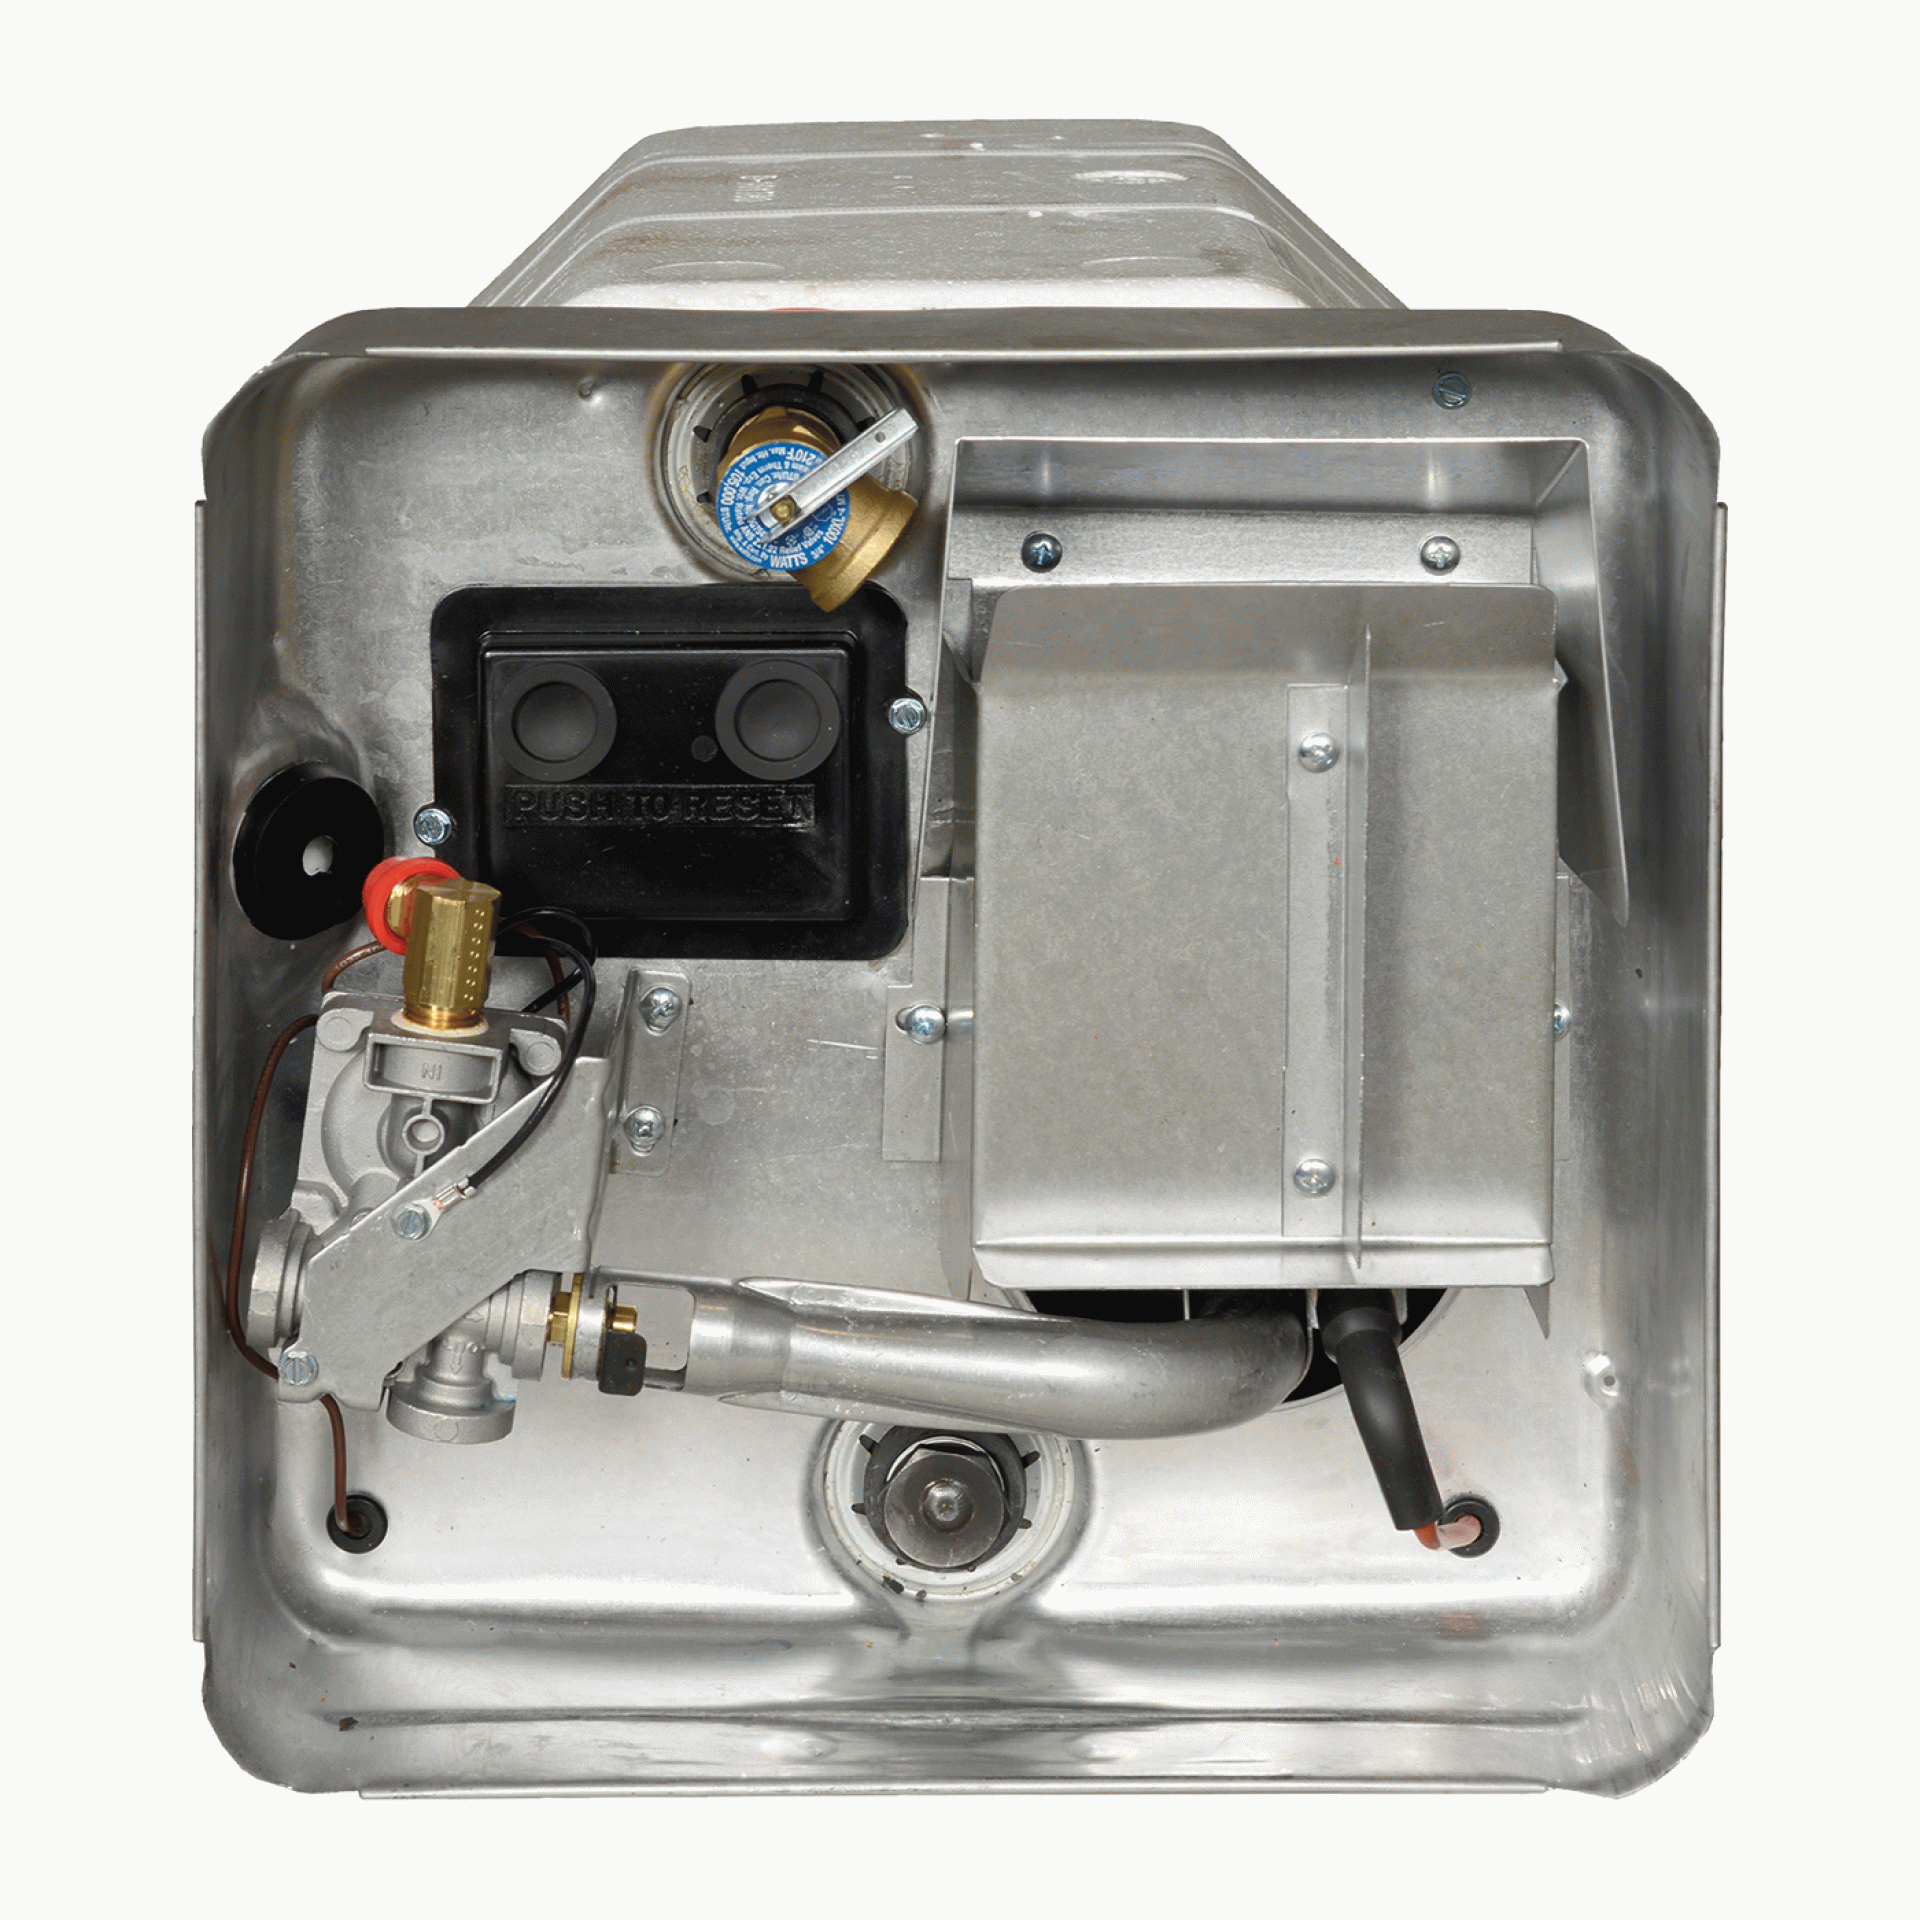 SUBURBAN MFG CO | 5233A | Water Heater Gas/Electric Direct Spark Ignition - 16 Gallon SW16DELC